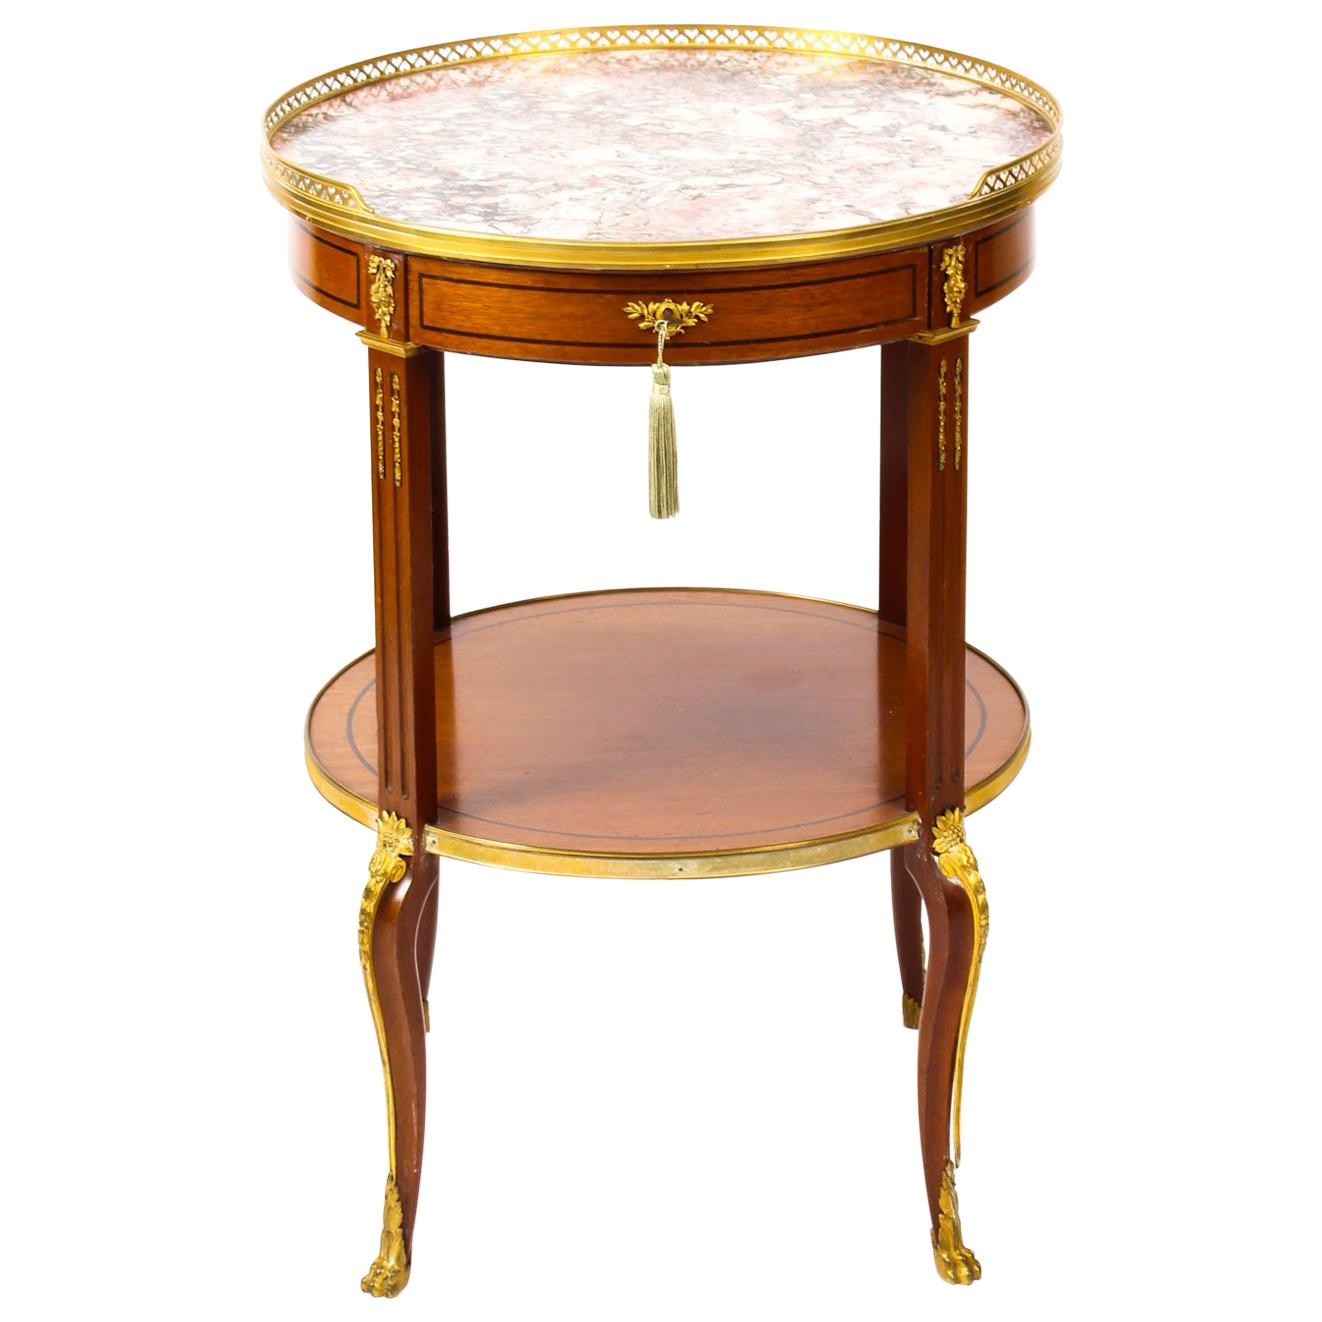 Antique French Louis Revival Marble and Ormolu Occasional Table, 19th Century For Sale